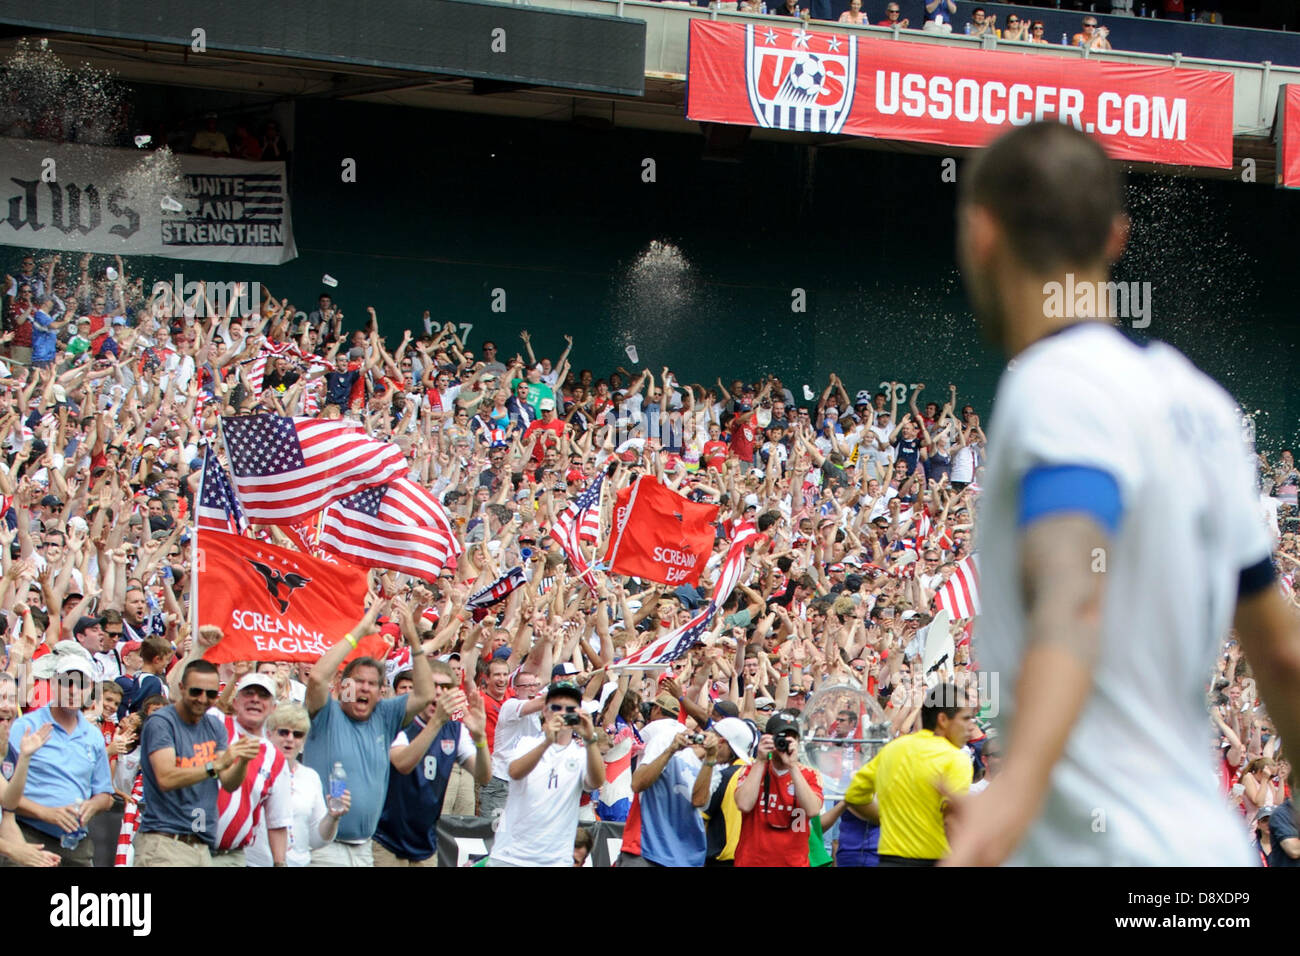 June 2, 2013 - Washington Dc, District of Columbia, U.S - June 02, 2013: U.S. Men's National Team forward Clint Dempsey (8) watches the crowd cheer and wave flags after he scored a goal during the U.S. Men's National Team vs. German National Team- Centennial celebration match at RFK Stadium - Washington, D.C. The U.S. Men's National Team defeats Germany 4-3. Stock Photo